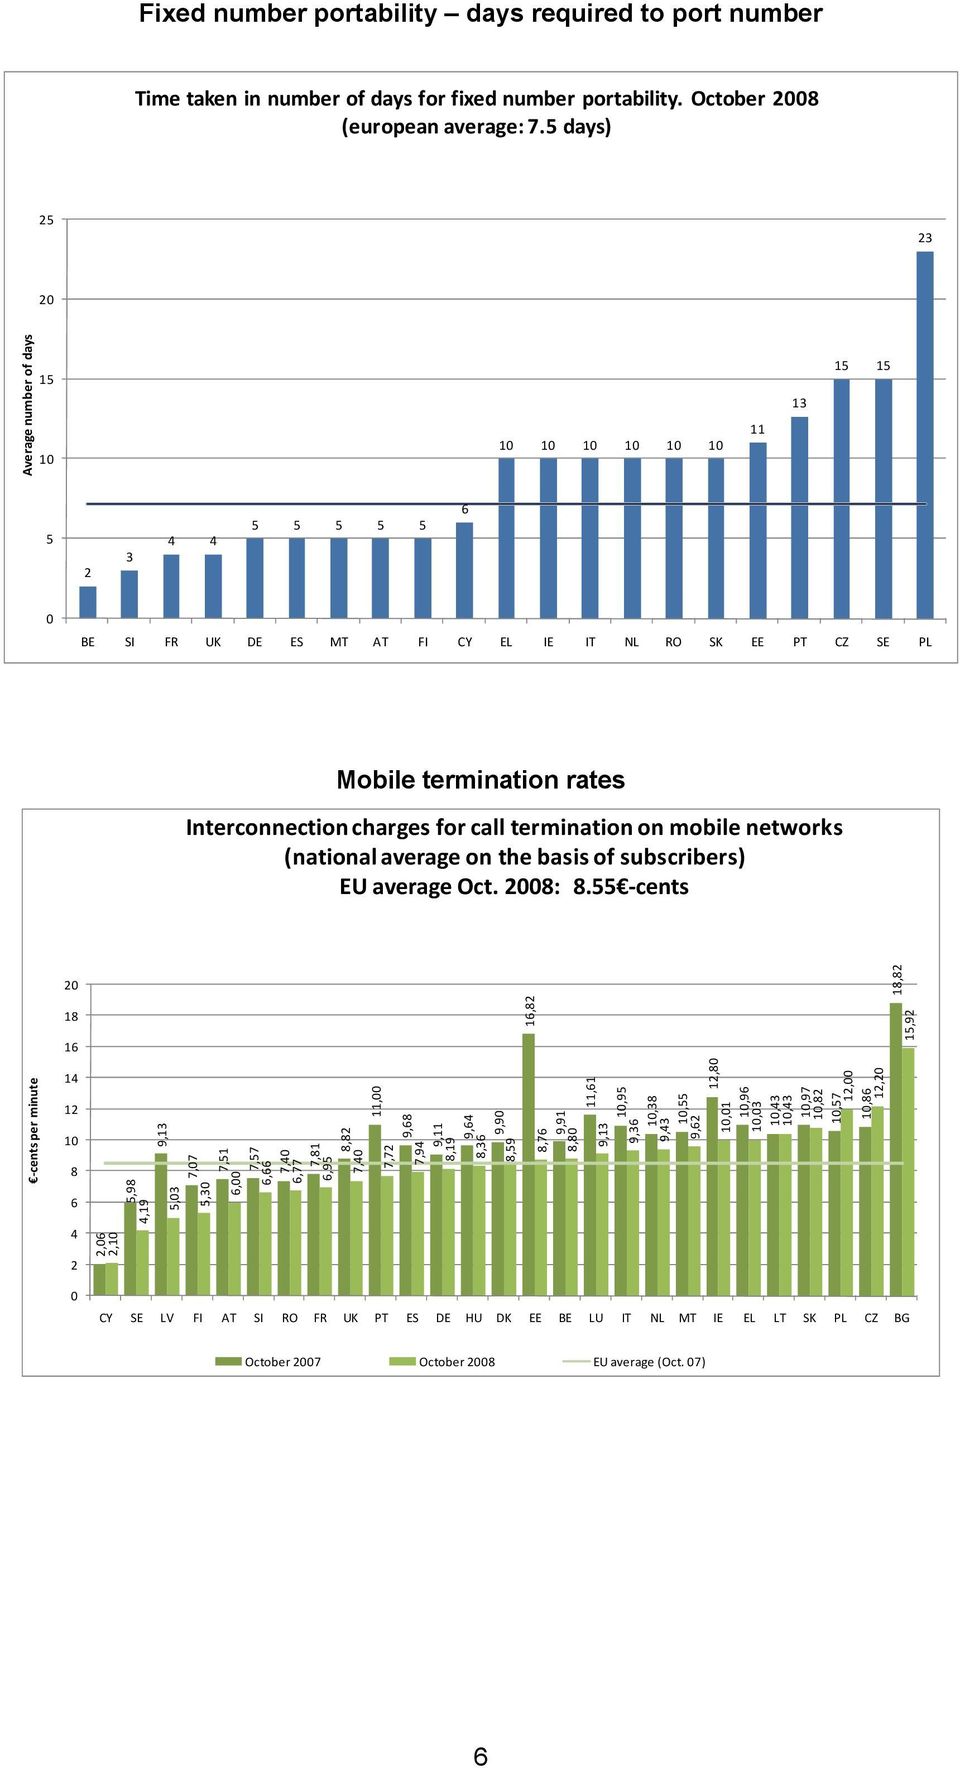 Interconnection charges for call termination on mobile networks (national average on the basis of subscribers) EU average Oct. 2008: 8.